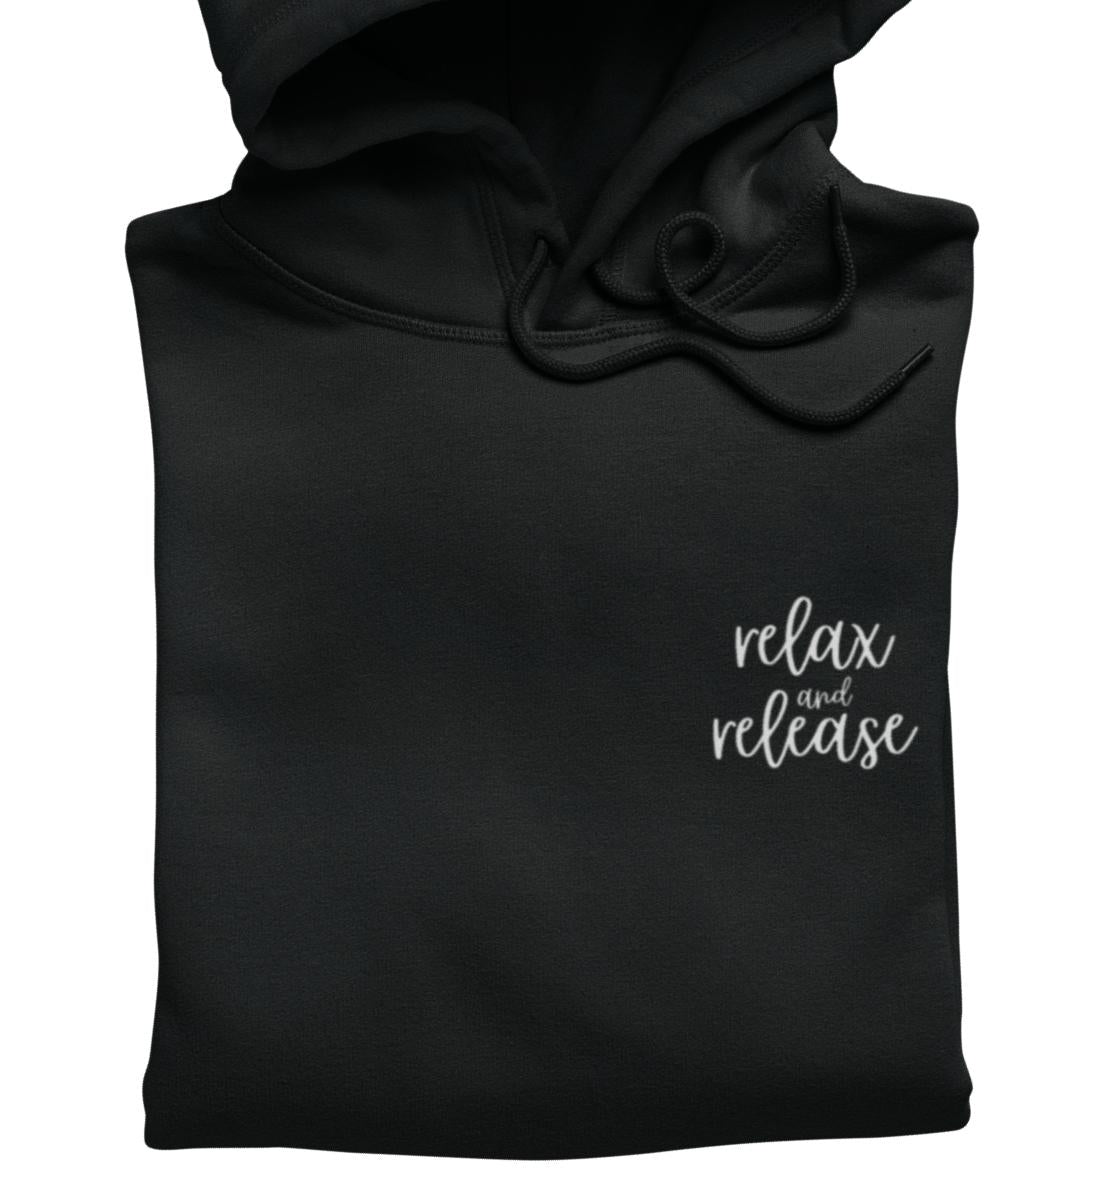 Relax and release Bio Hoodie Unisex